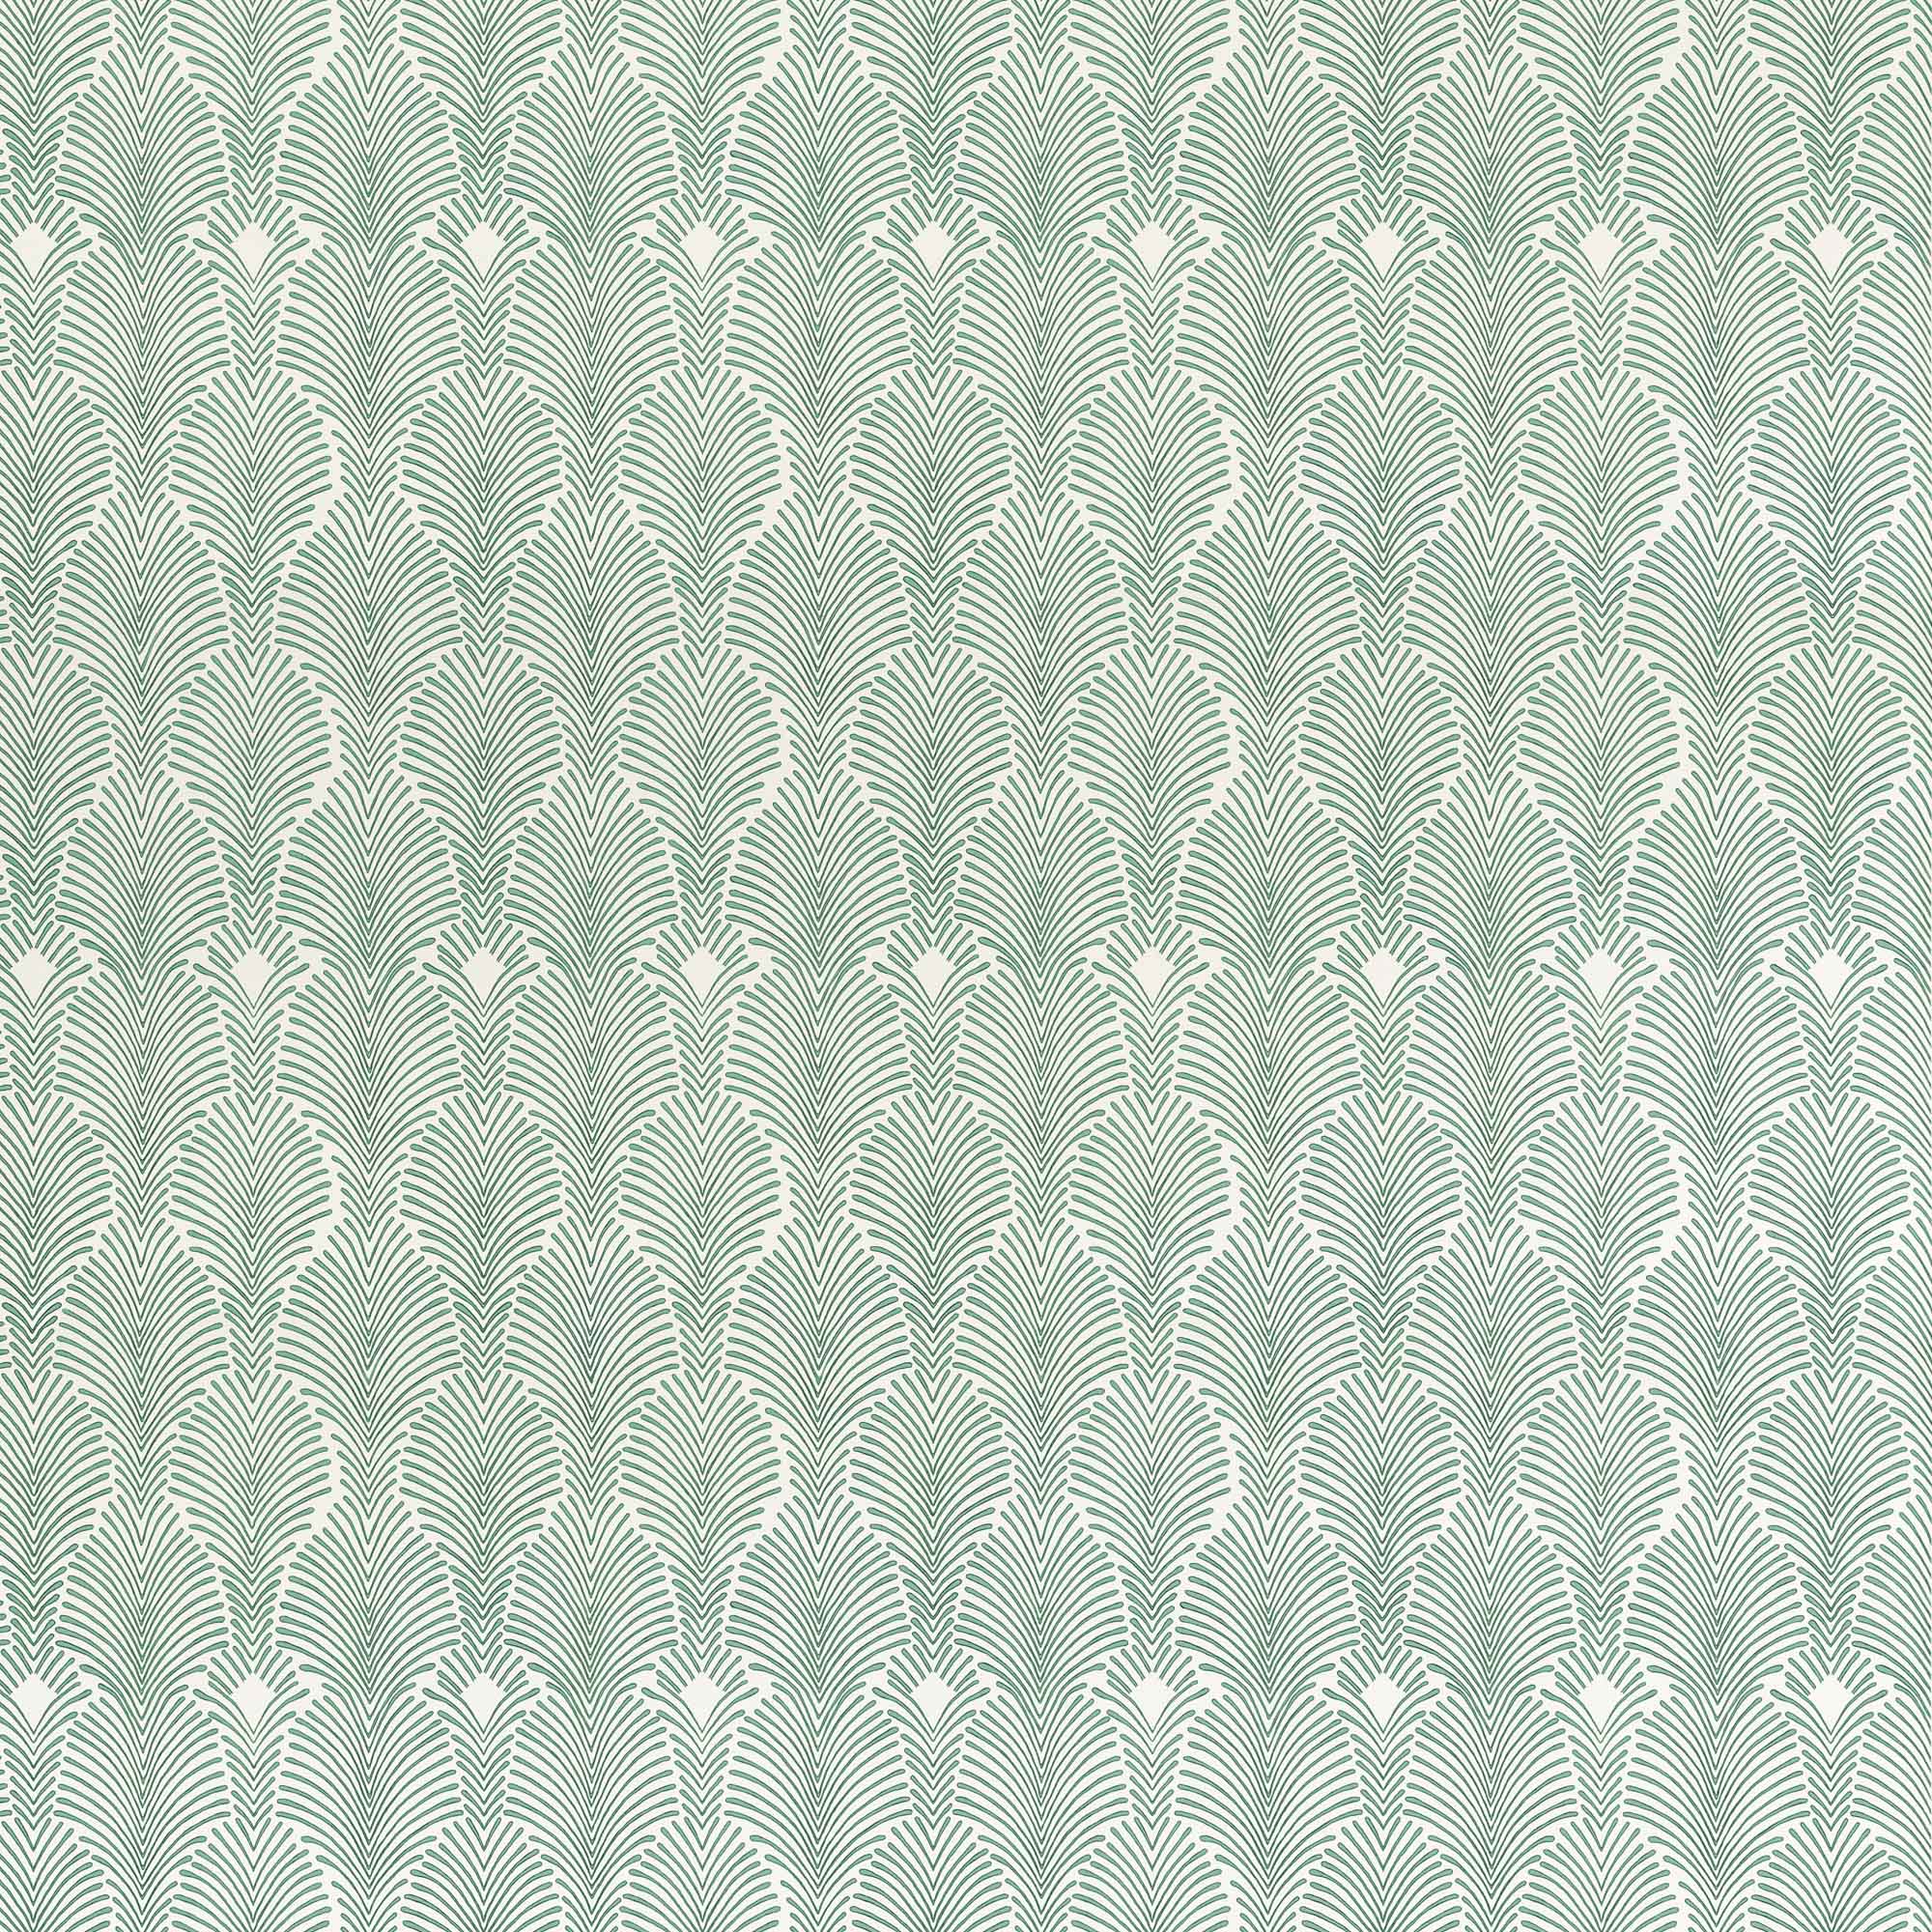 Detail of wallpaper in an art deco damask print in turquoise on a white field.